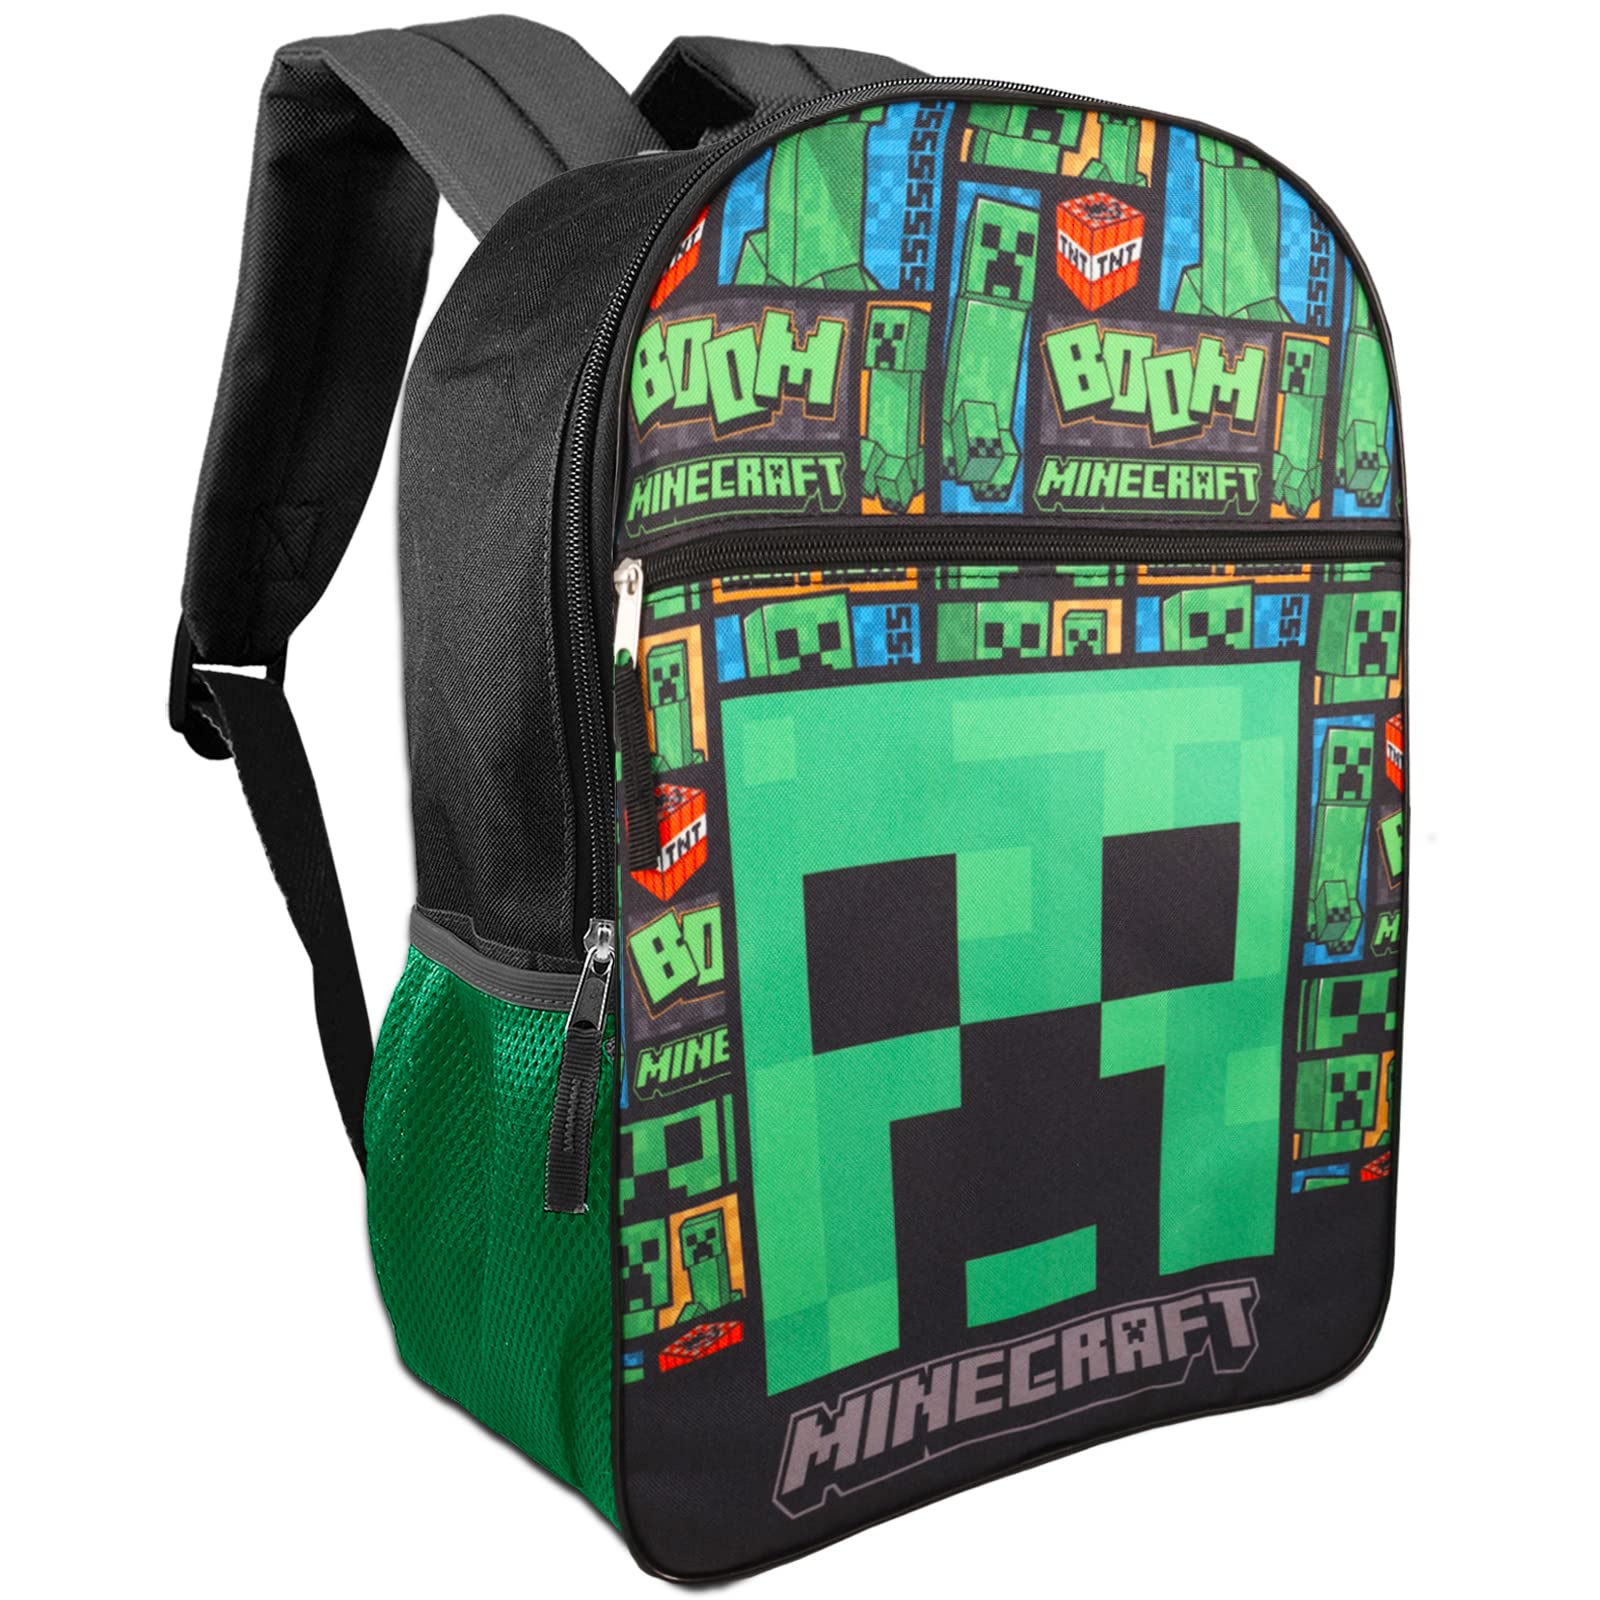 Minecraft School Supplies for Kids - Bundle with 16" Minecraft Backpack for School and Travel Plus Minecraft Stickers, Battle Party Stickers, and More (Minecraft School Bag)